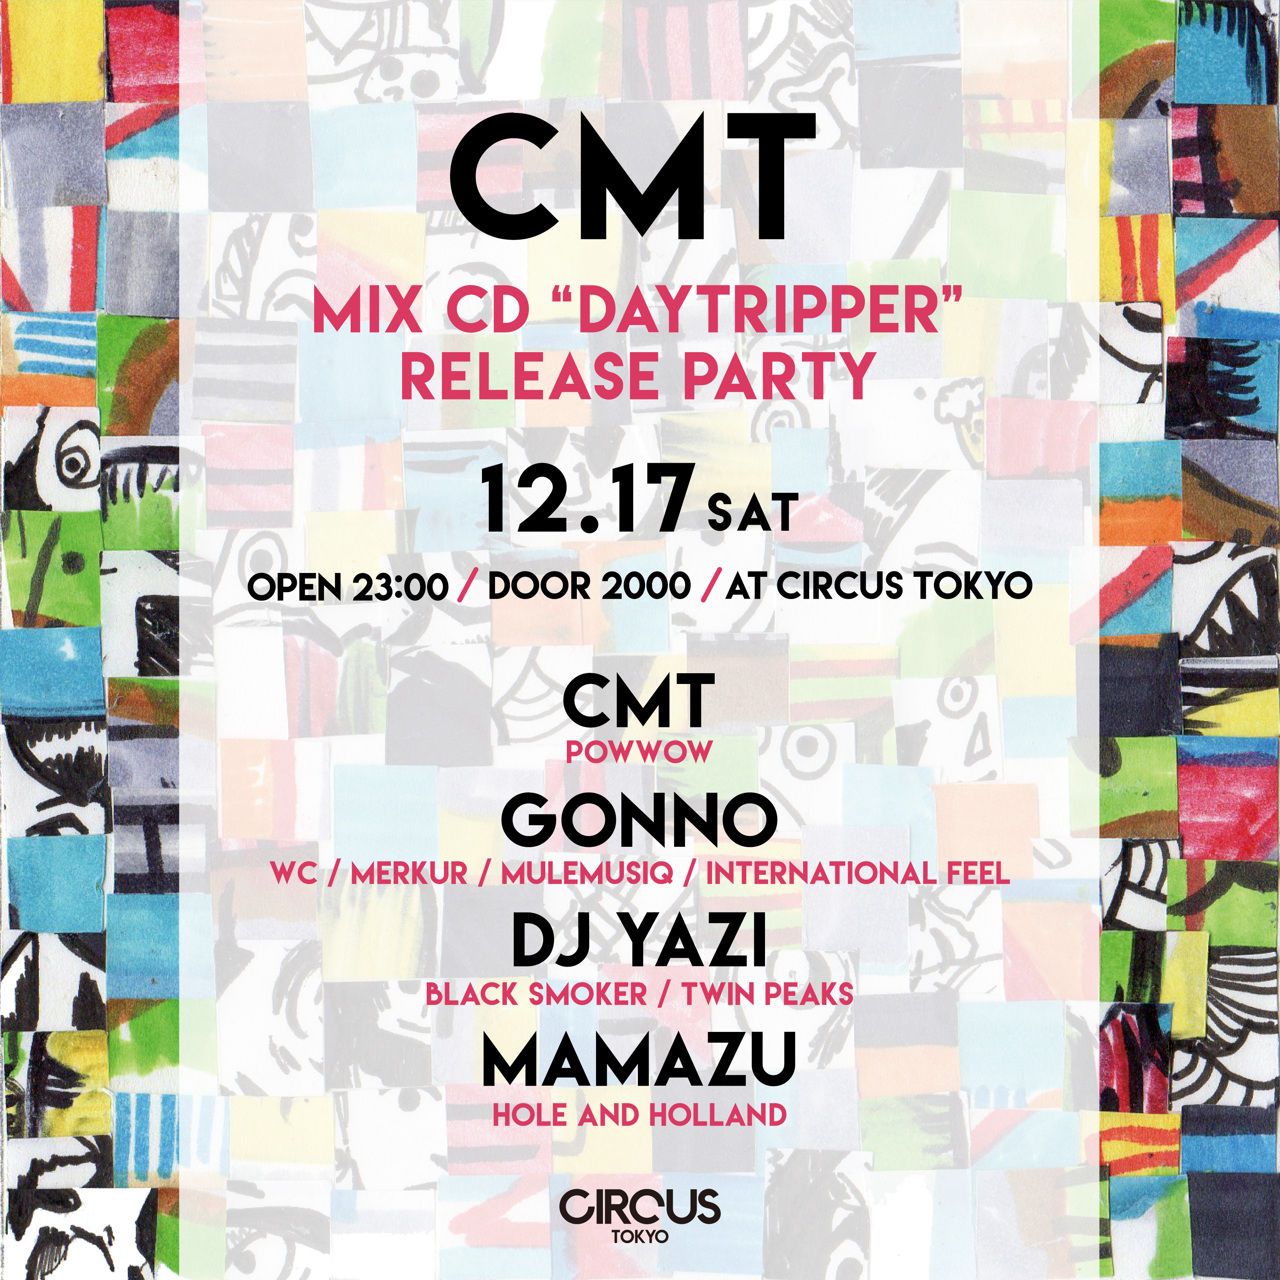 CMT MIX CD ”daytripper” Release Party